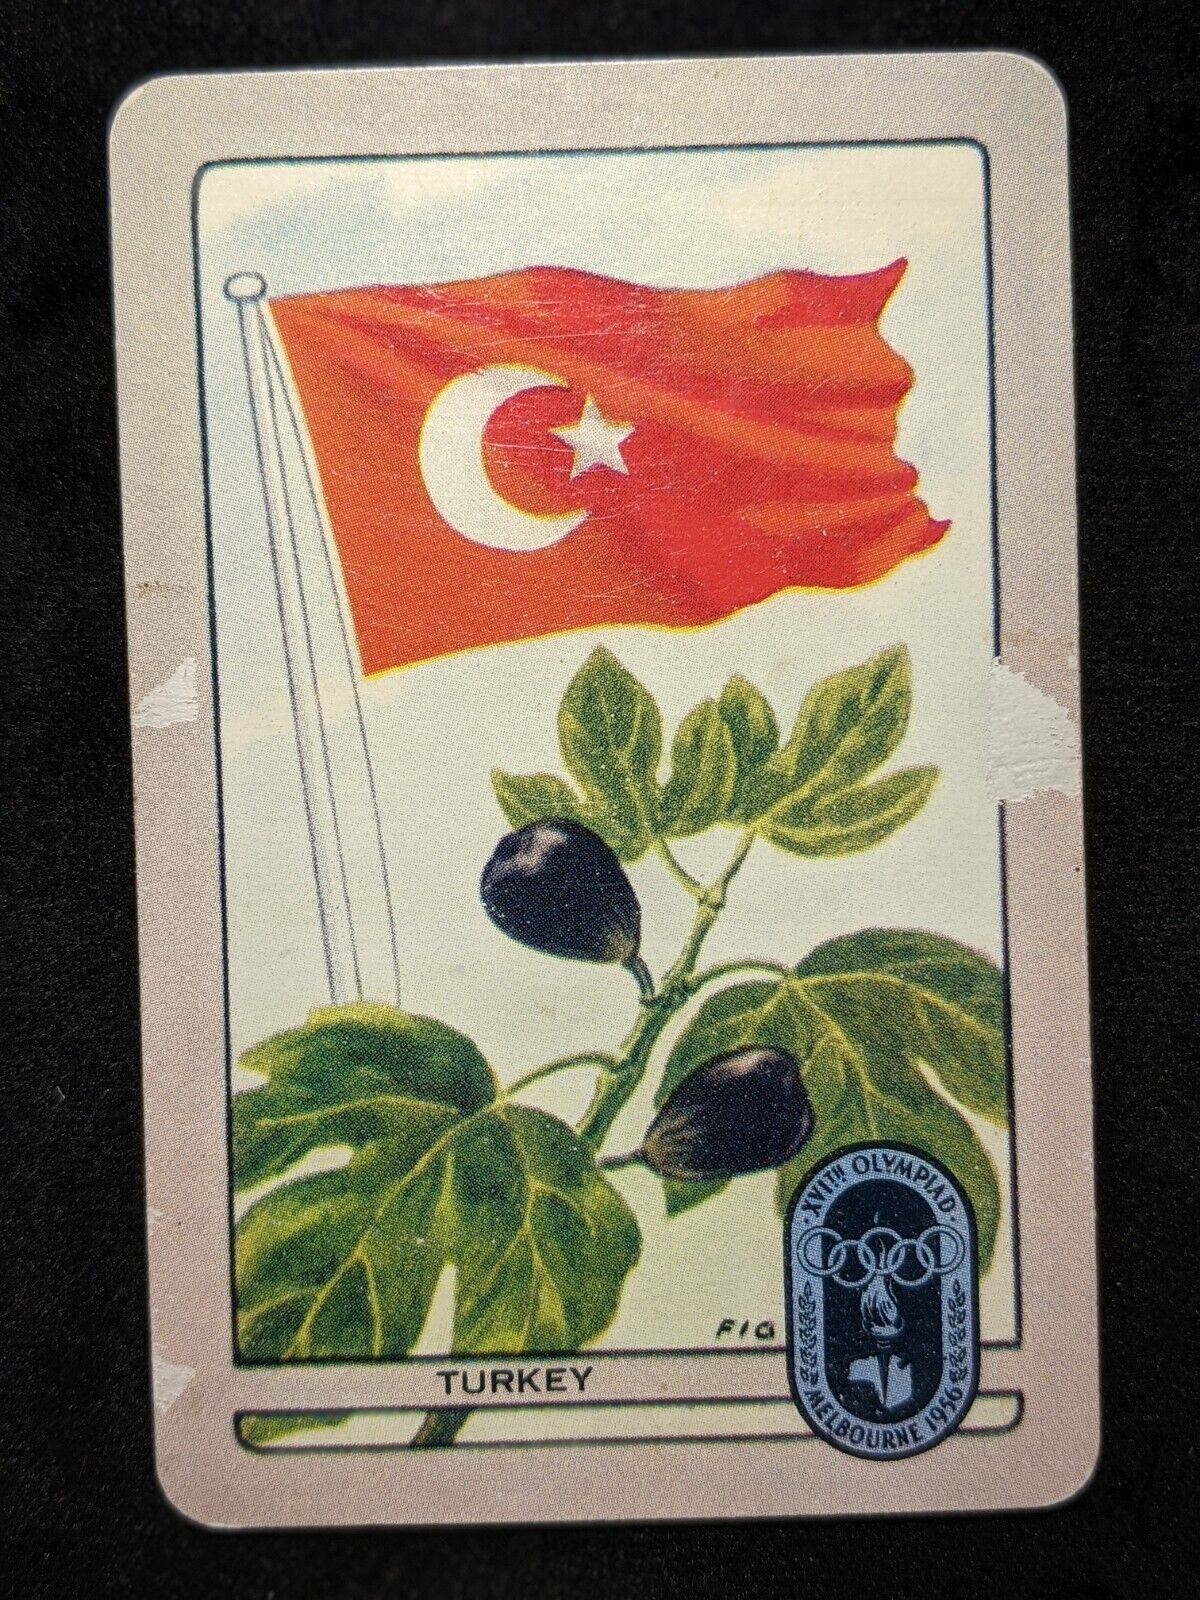 Coles Named Series Original 1950's 1956 Olympic Games Large Flag Turkey #008